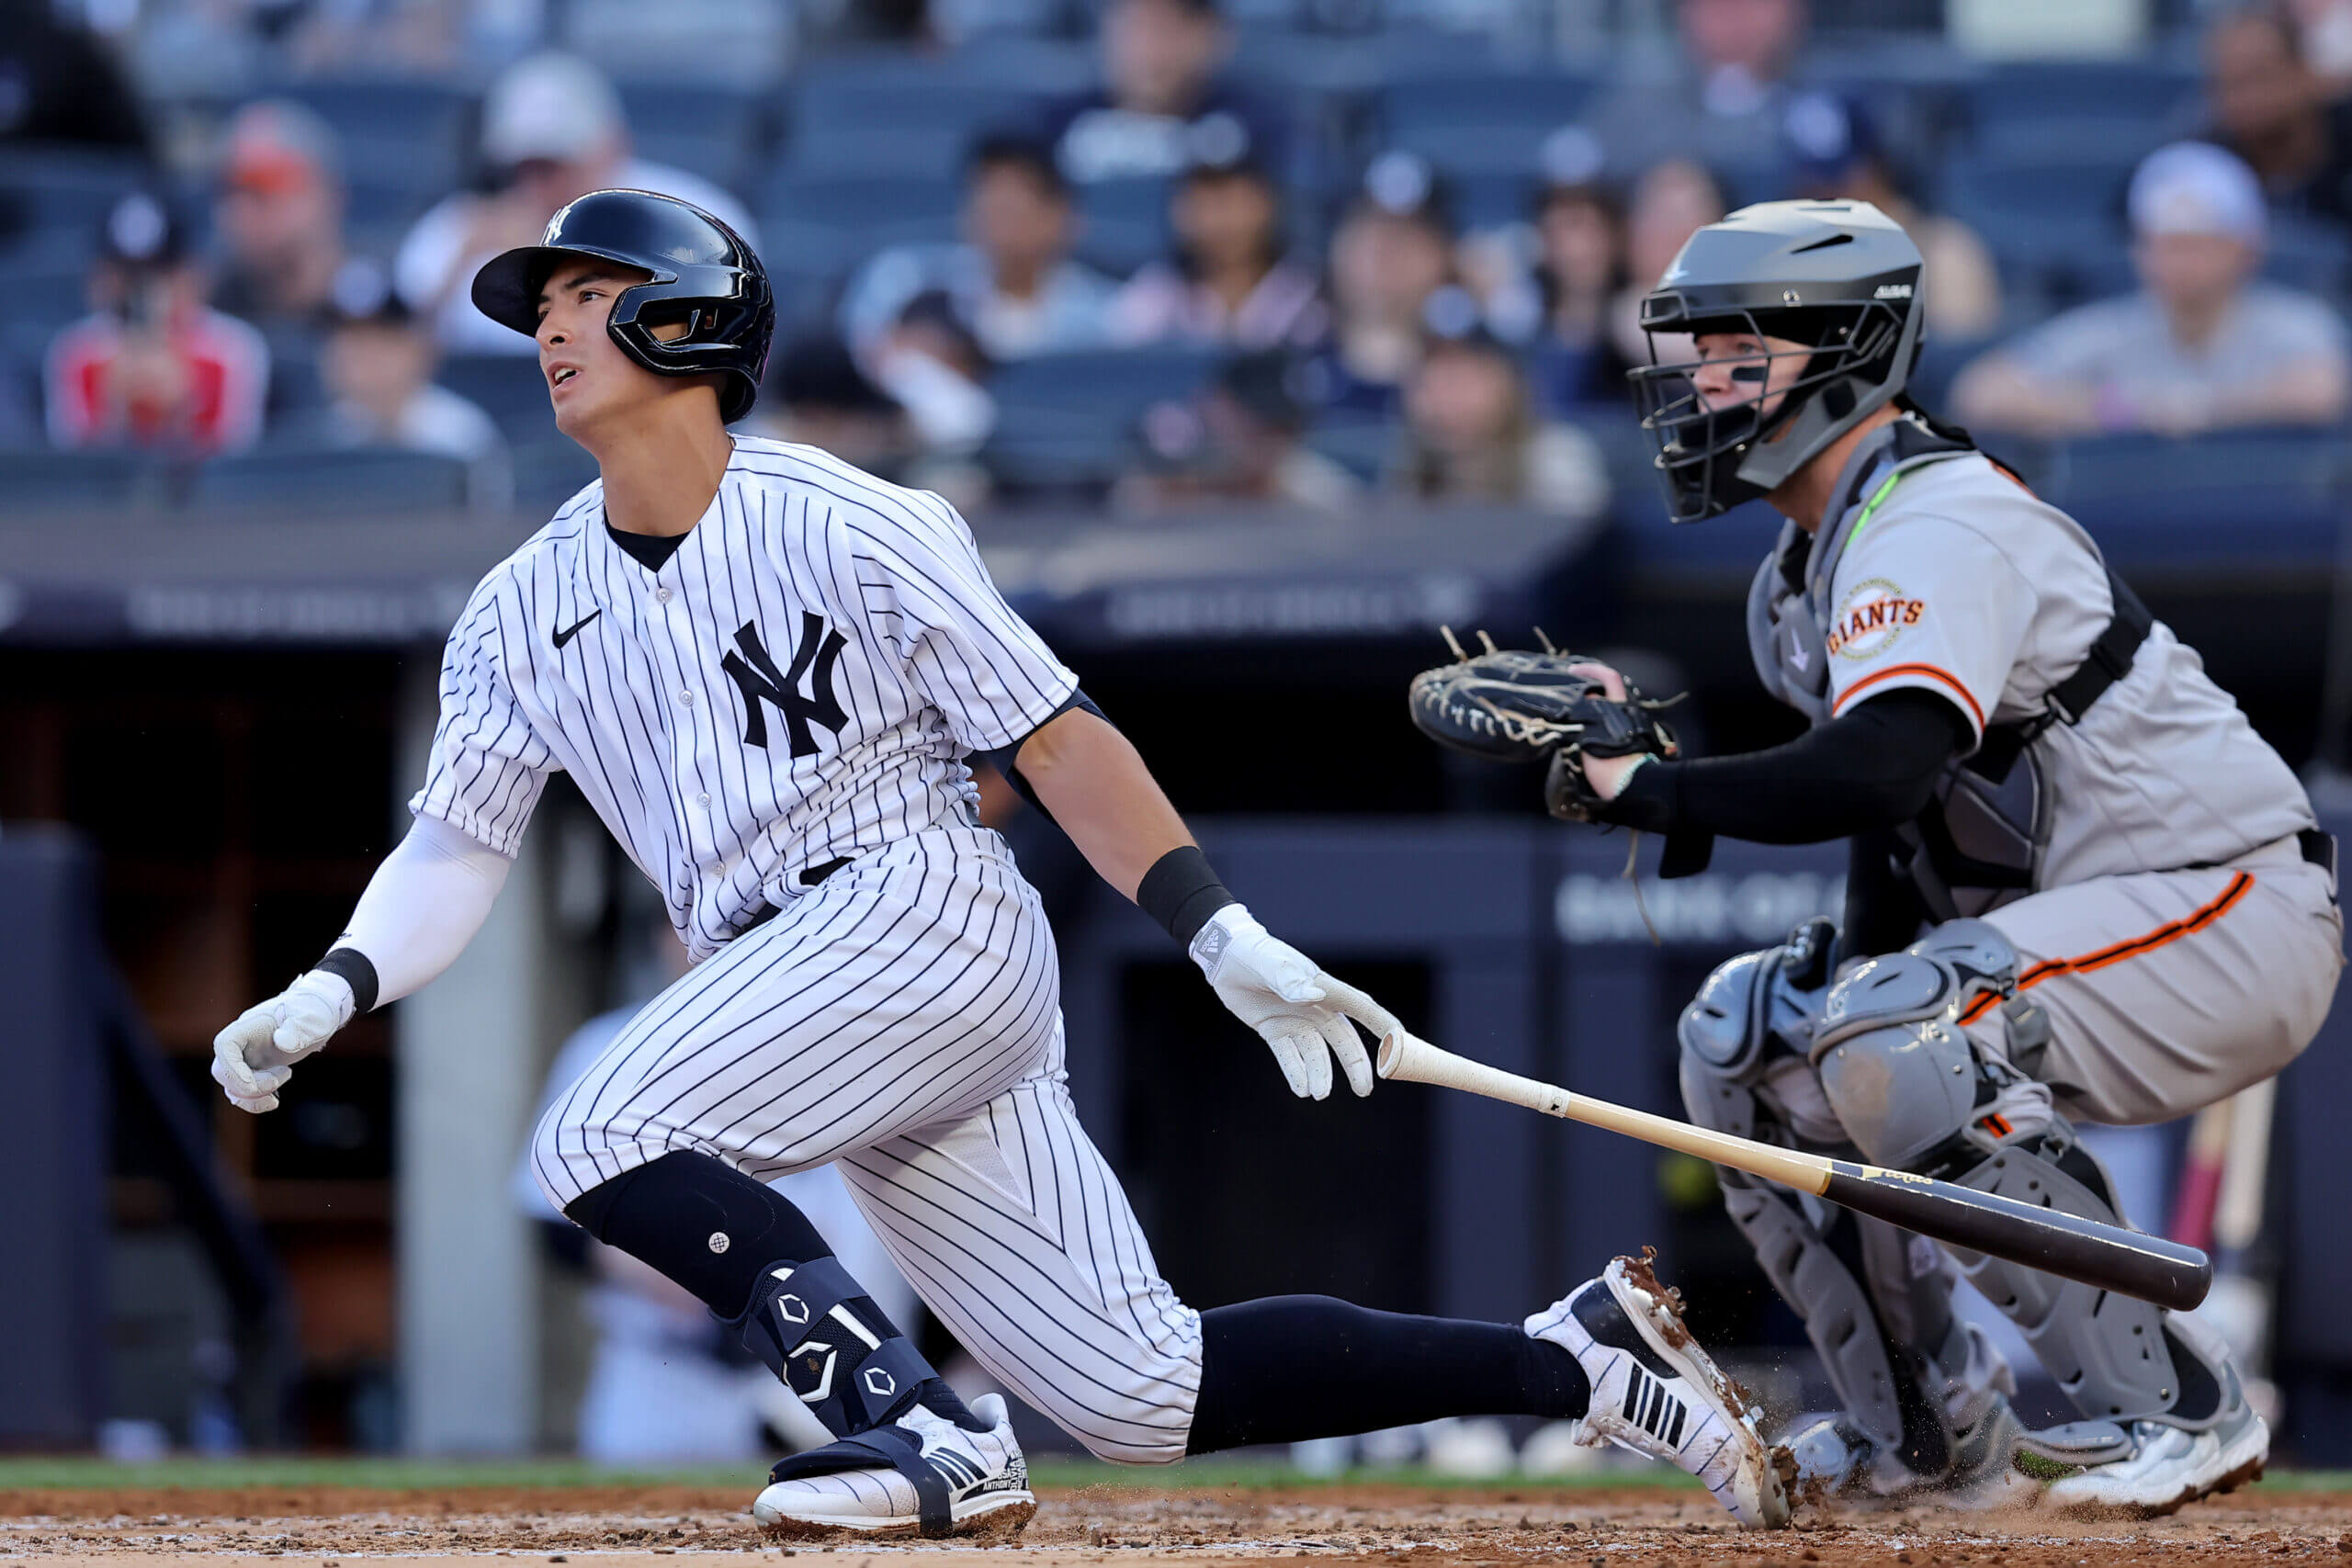 Anthony Volpe's path to Yankees' Opening Day roster has many obstacles